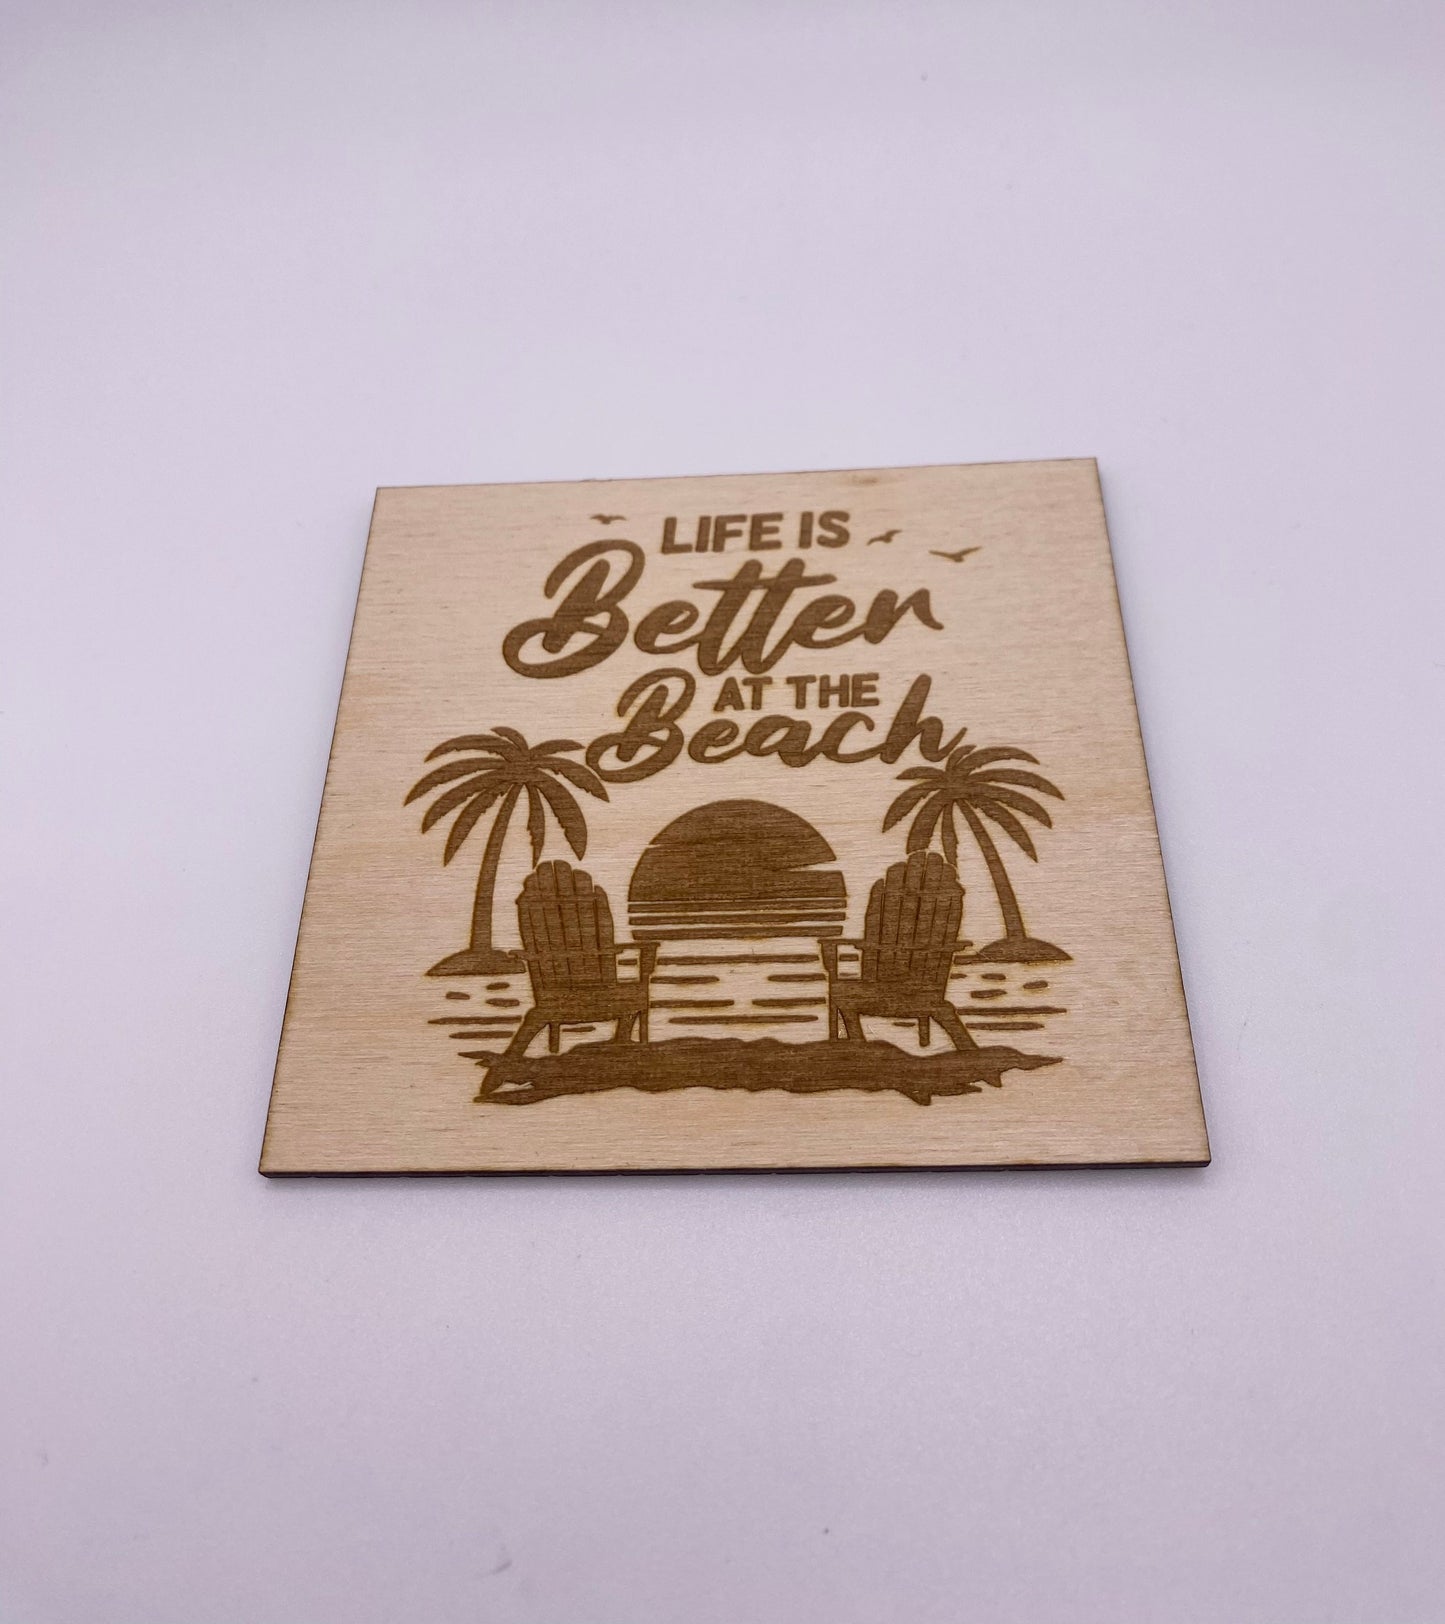 Life is better at the beach - Creative Designs By Kari